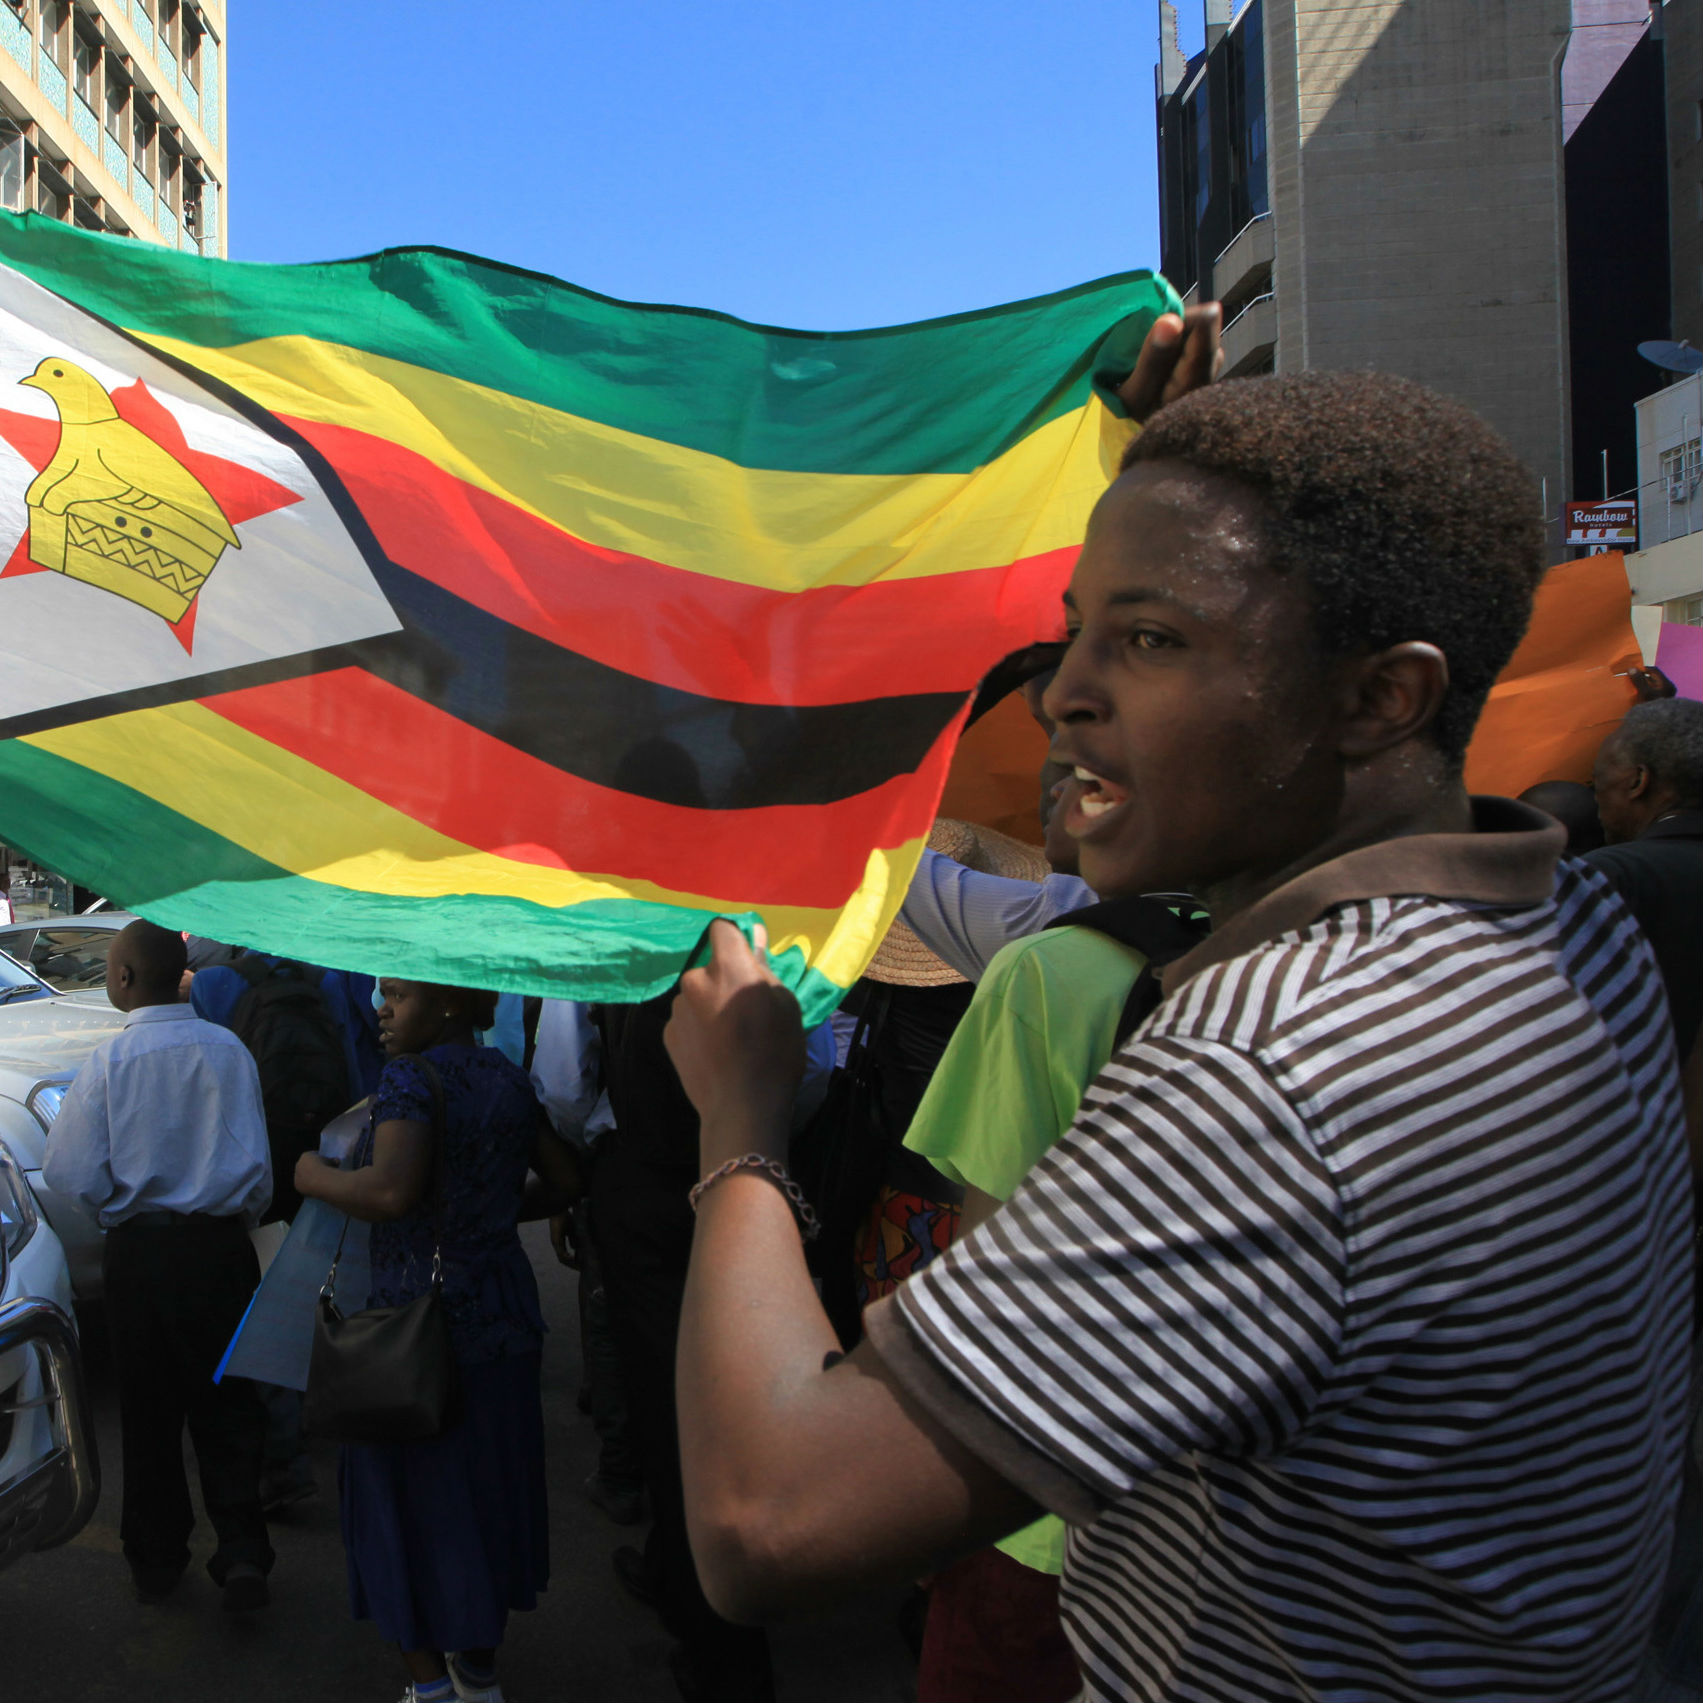 Zimbabwean pastor and protest leader arrested